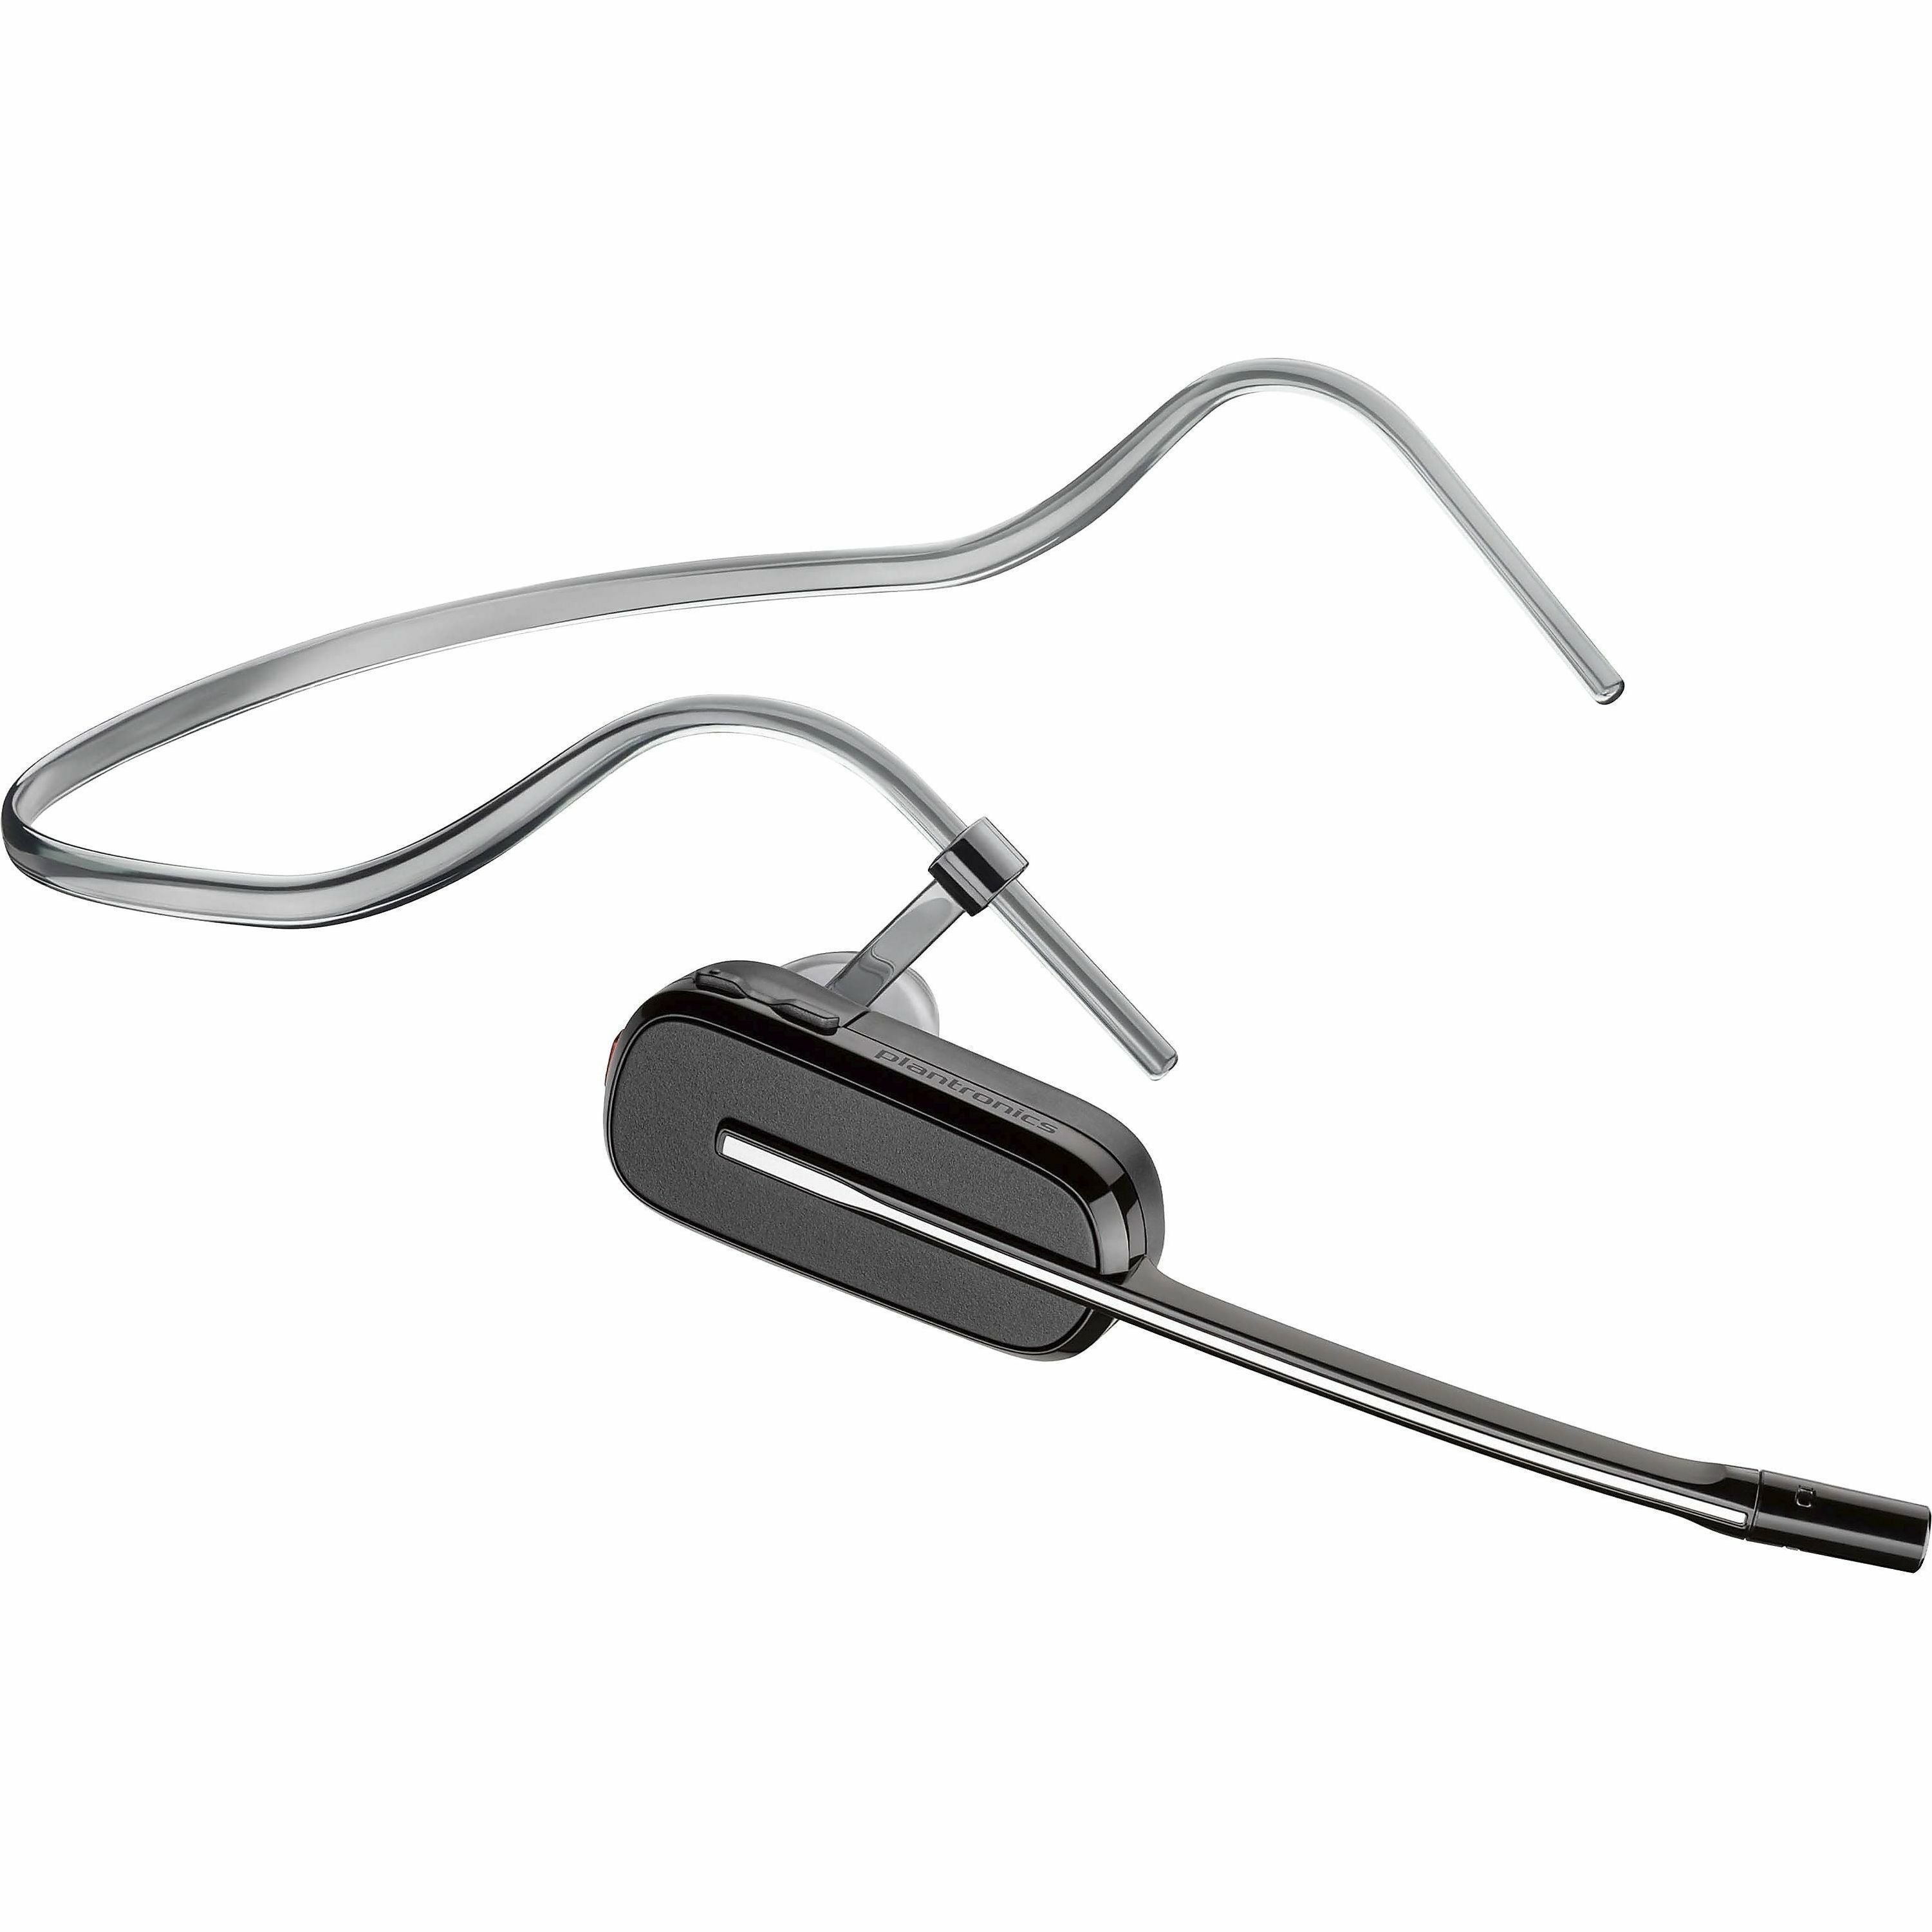 poly-savi-8240-convertible-office-headset-mono-wireless-bluetooth-dect-590-ft-32-ohm-20-hz-20-khz-on-ear-monaural-in-ear-noise-cancelling-microphone-black-taa-compliant_hew7w071aa - 4